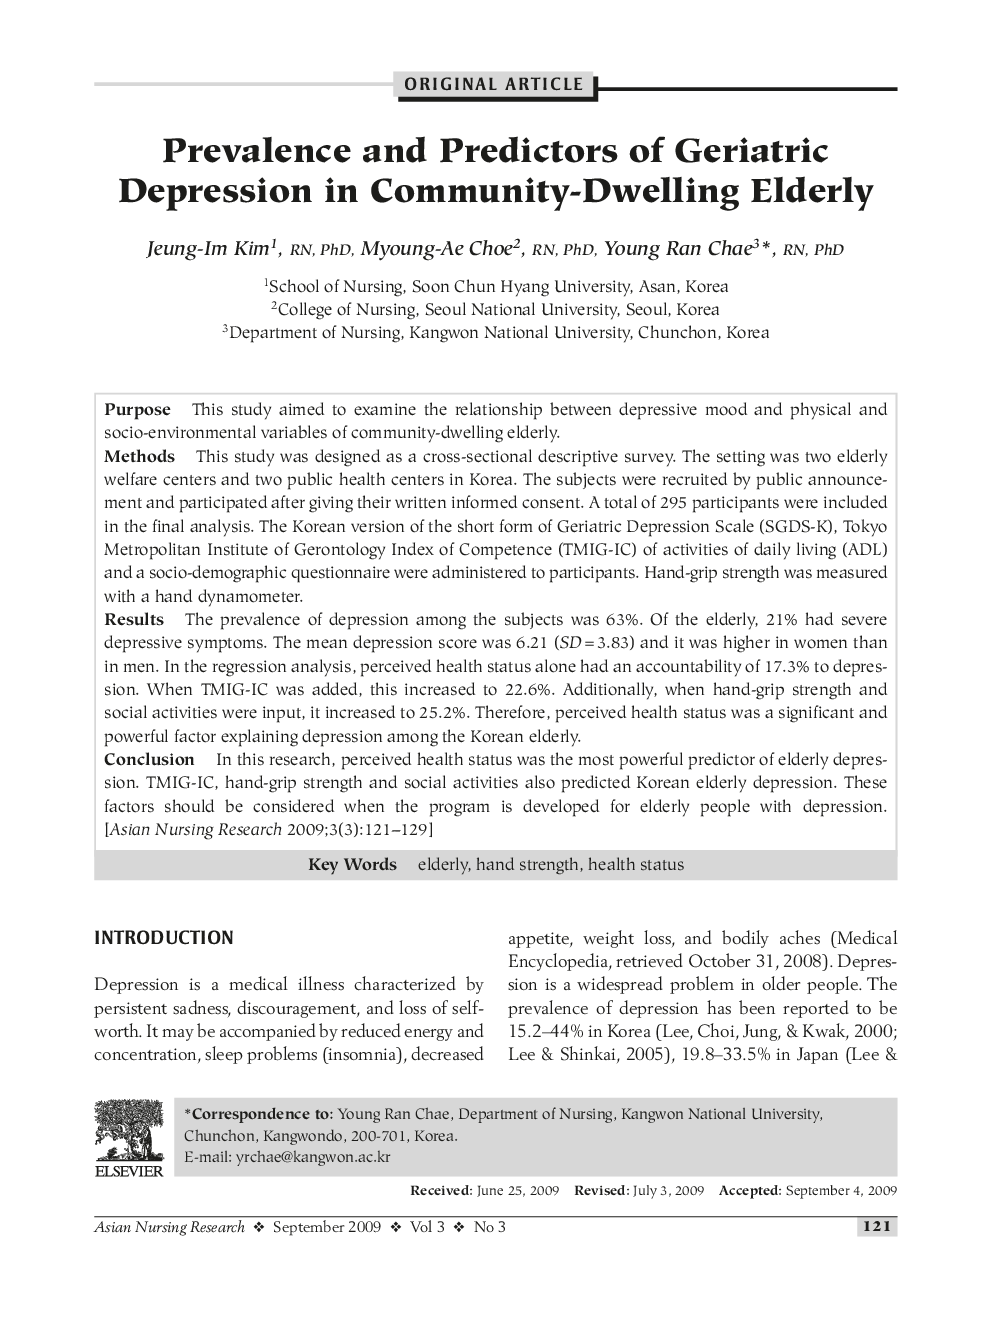 Prevalence and Predictors of Geriatric Depression in Community-Dwelling Elderly